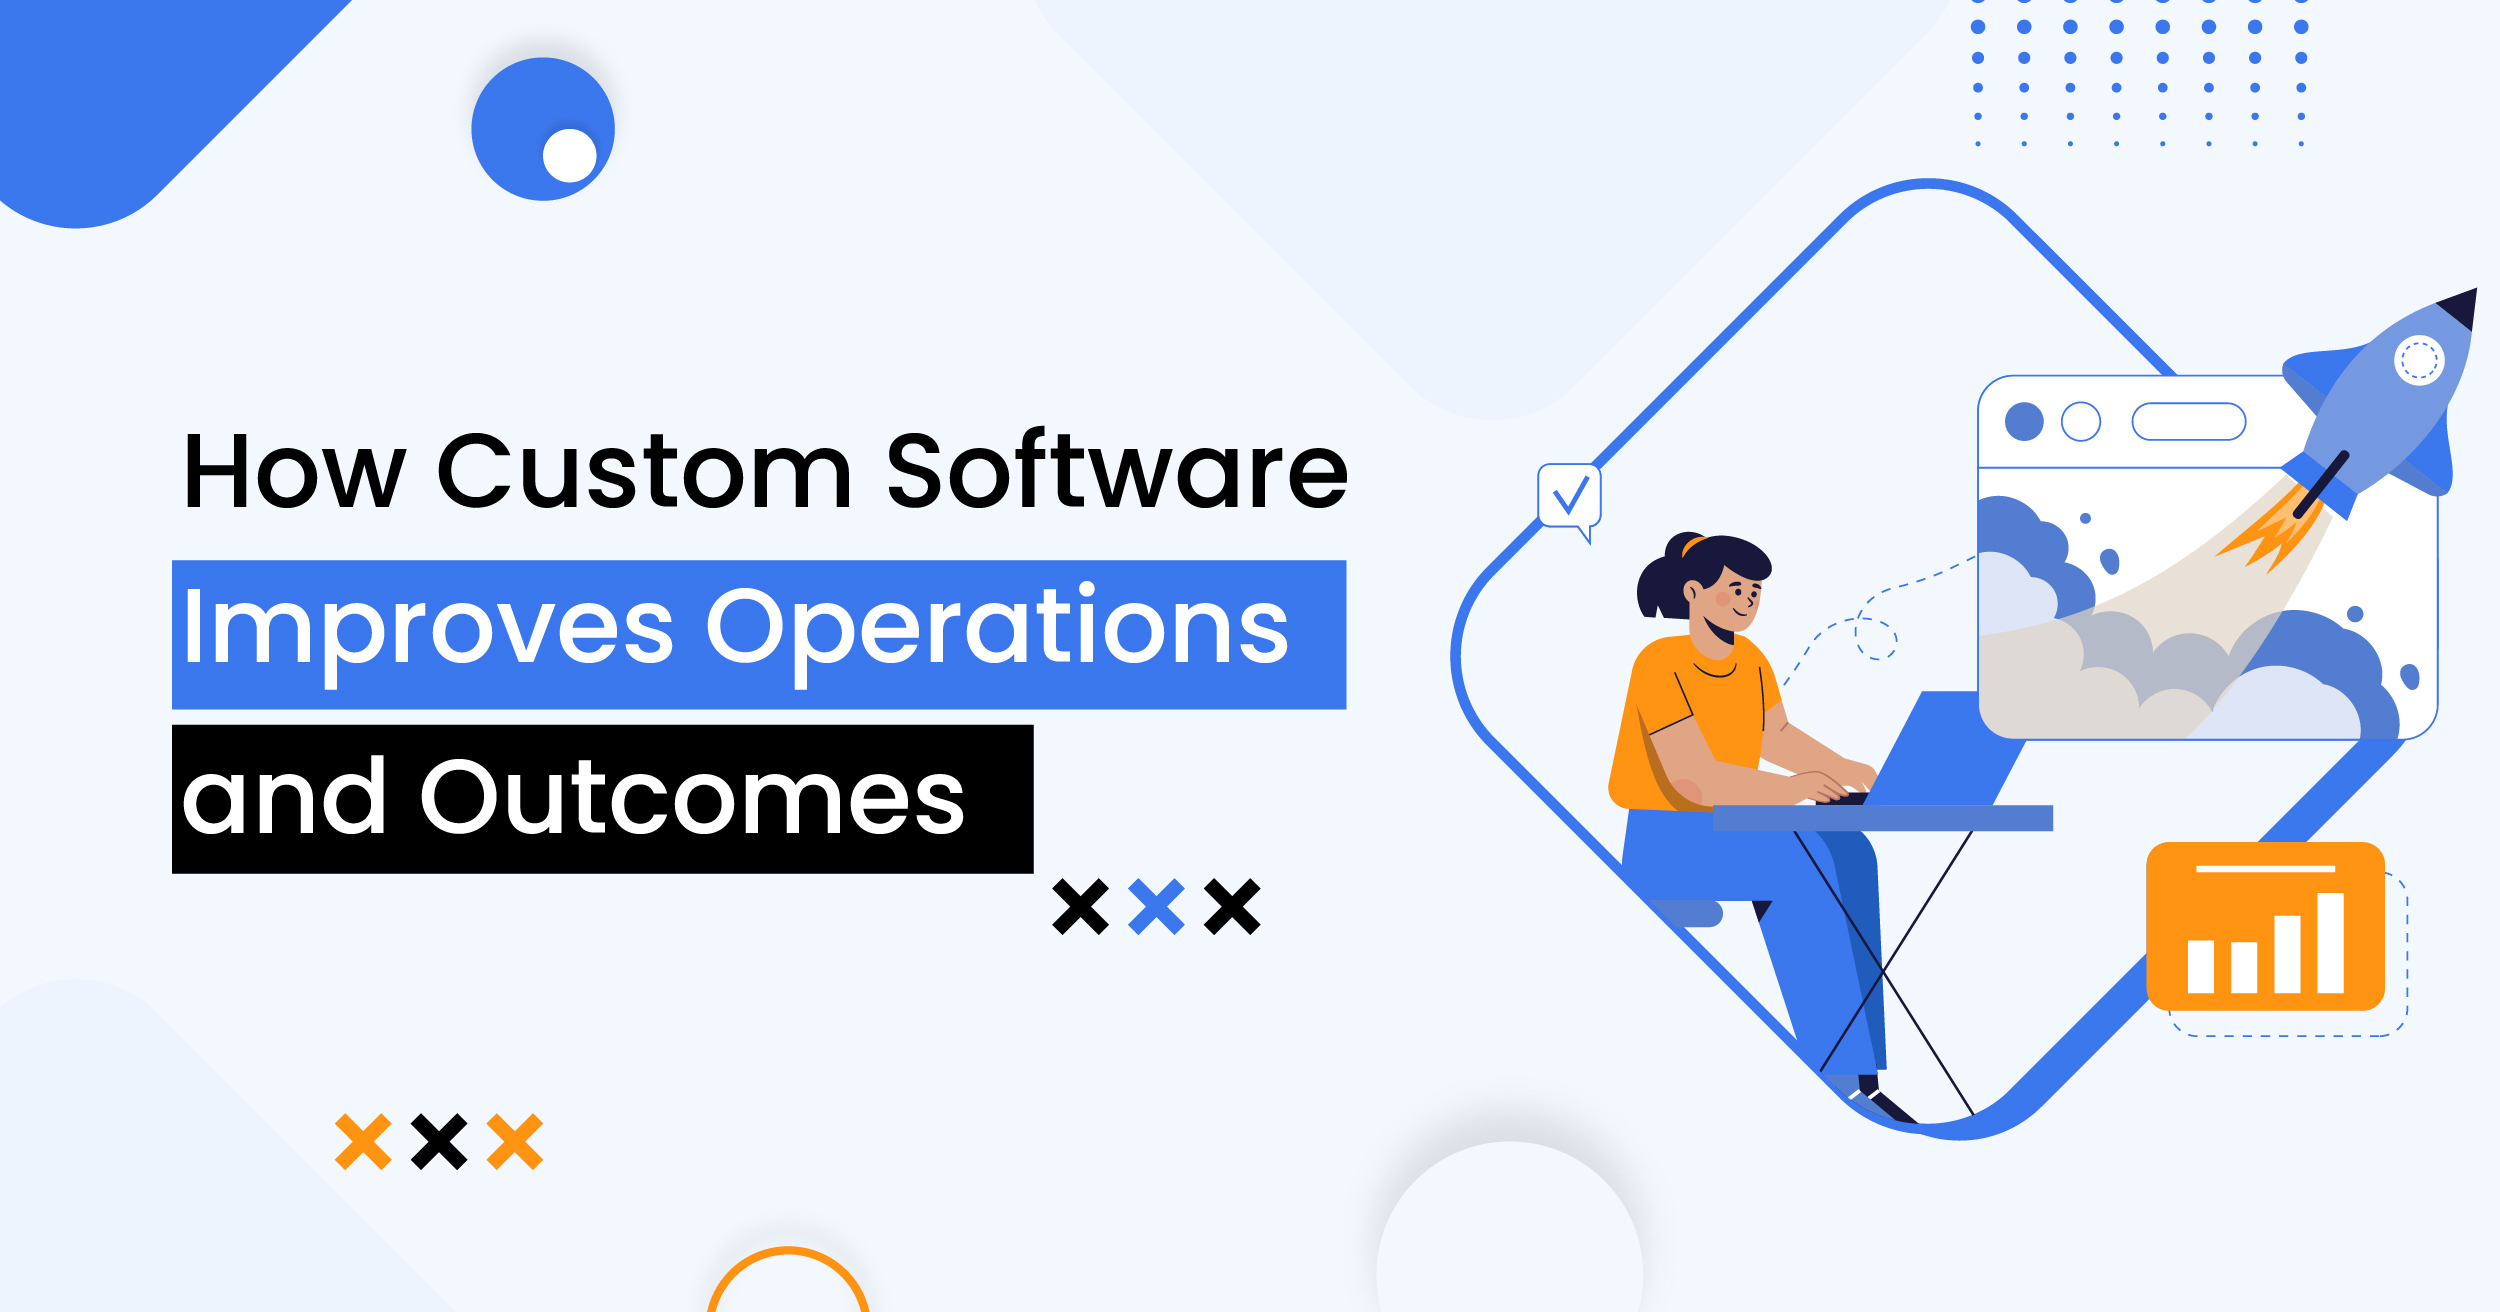 How Custom Software Improves Operations and Outcomes